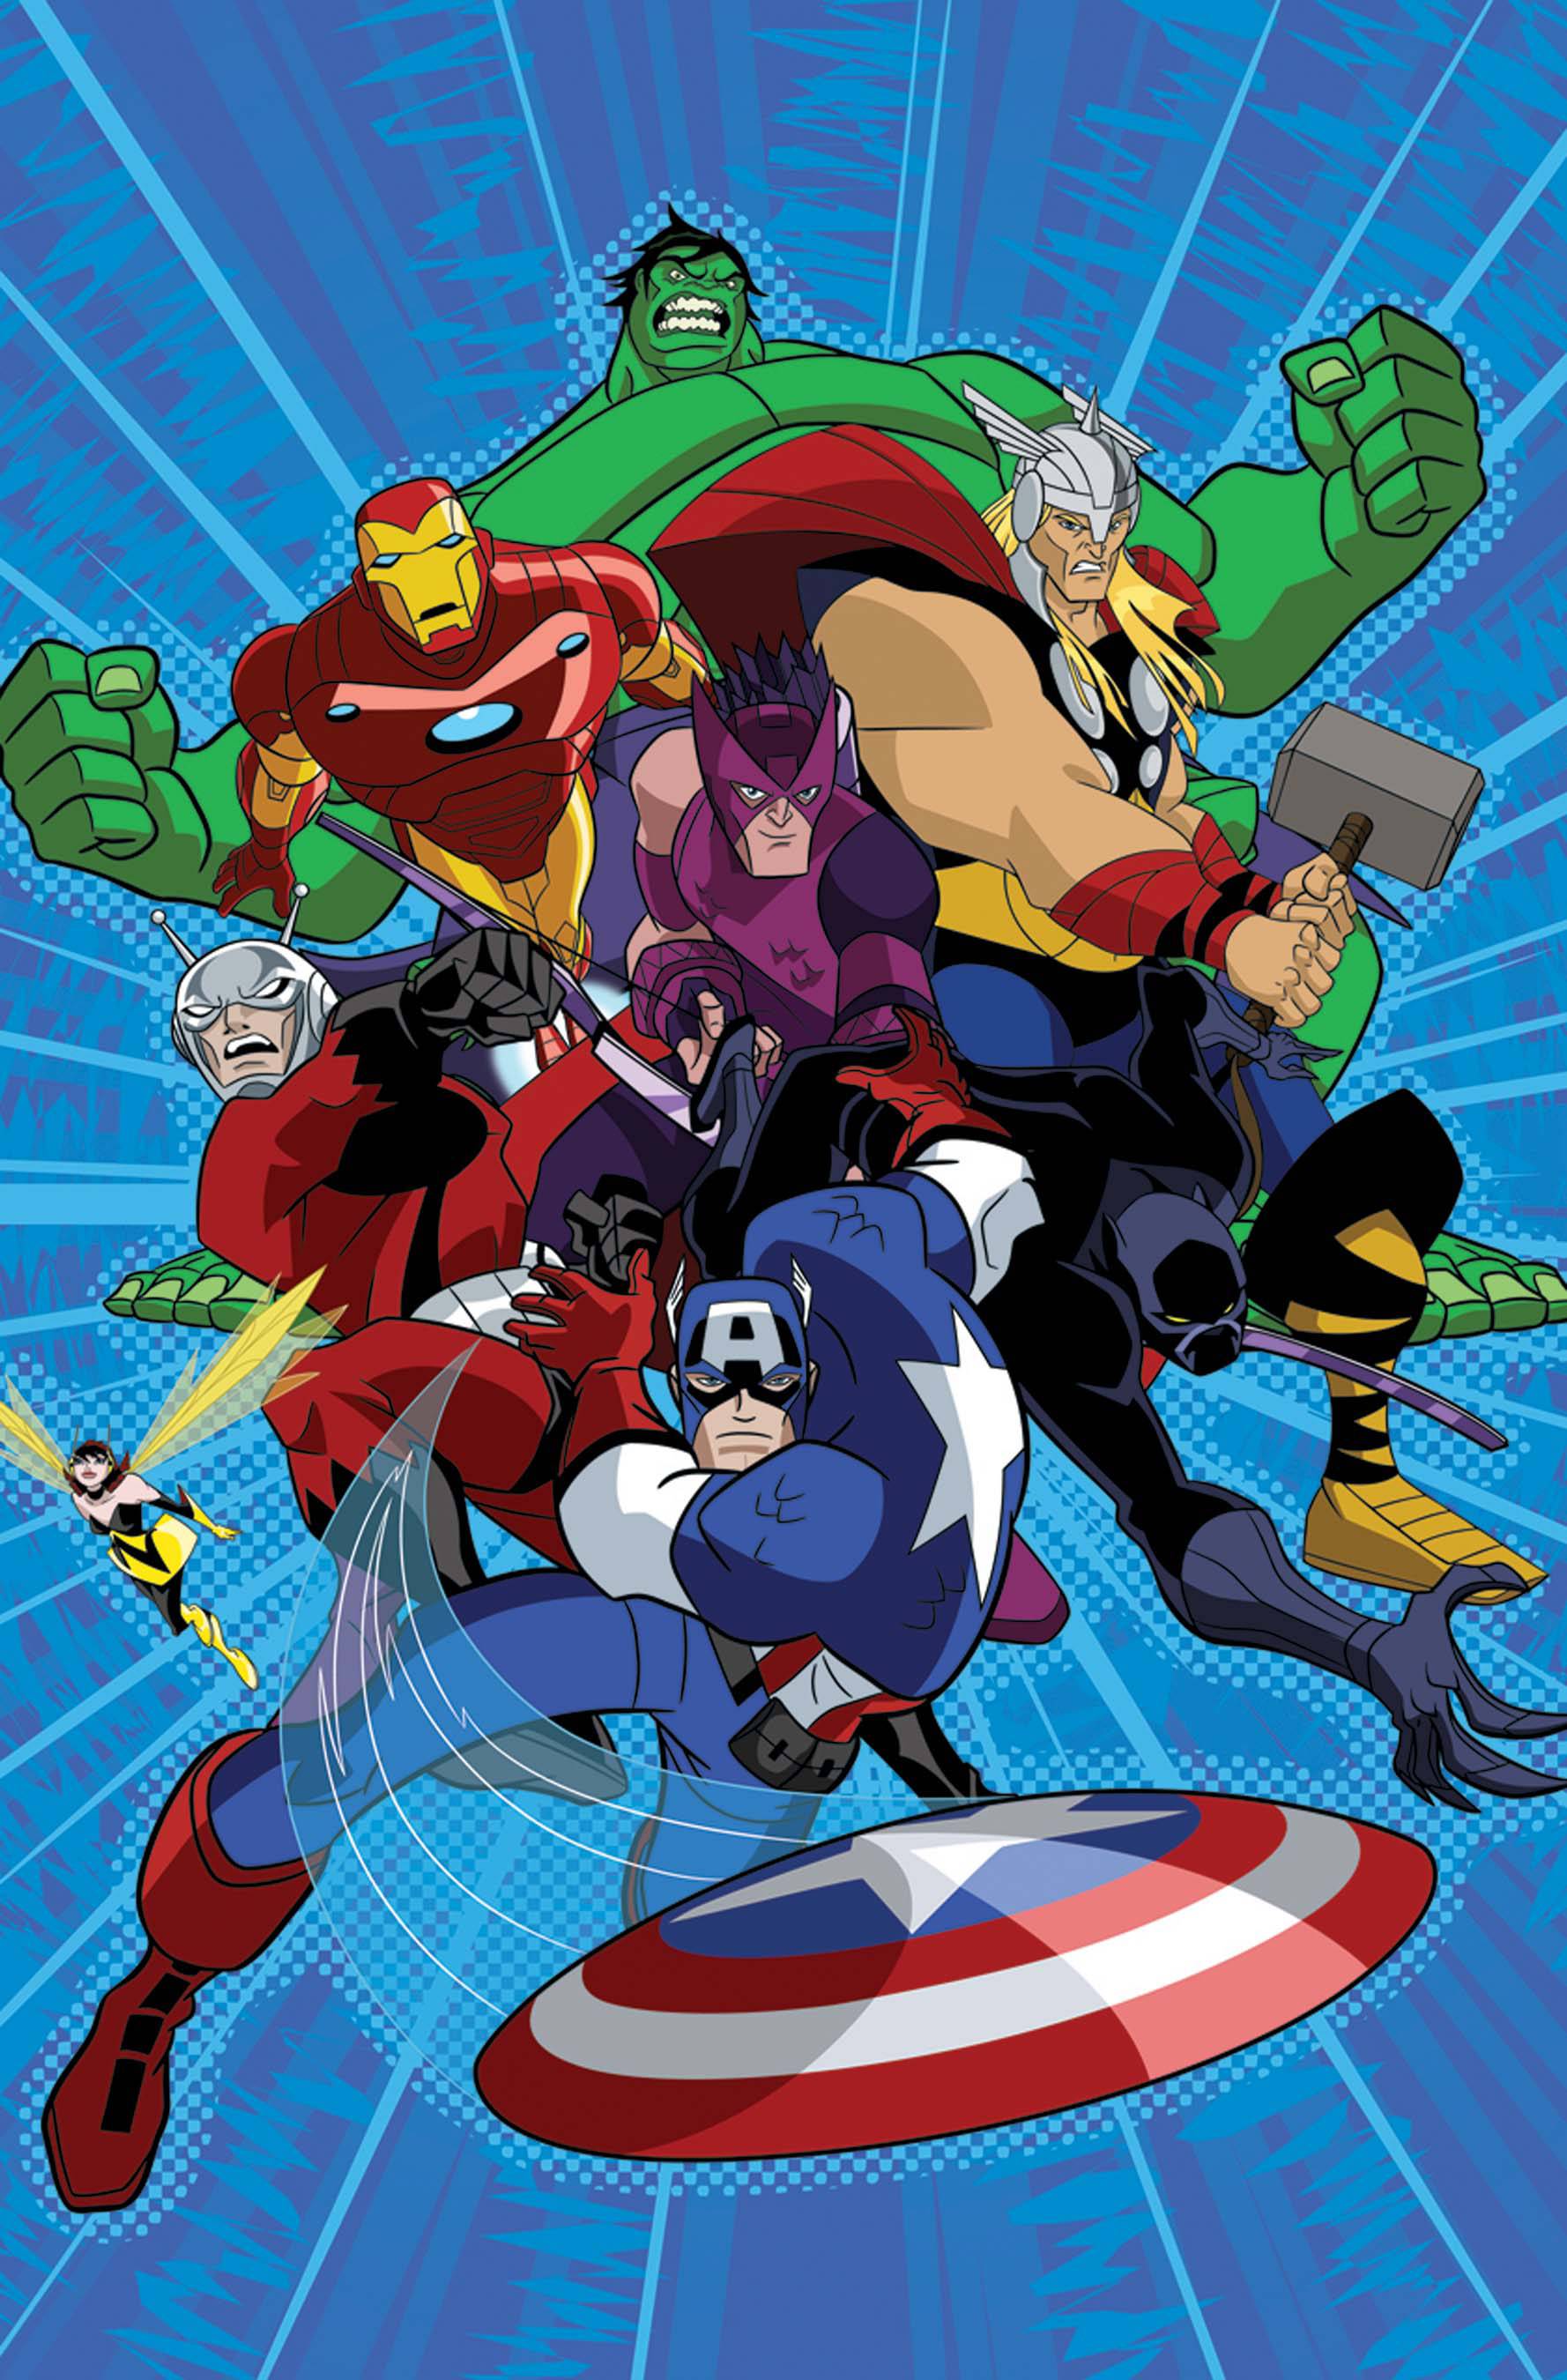 Review) The Avengers: Earth's Mightiest Heroes | I Am Your Target  Demographic